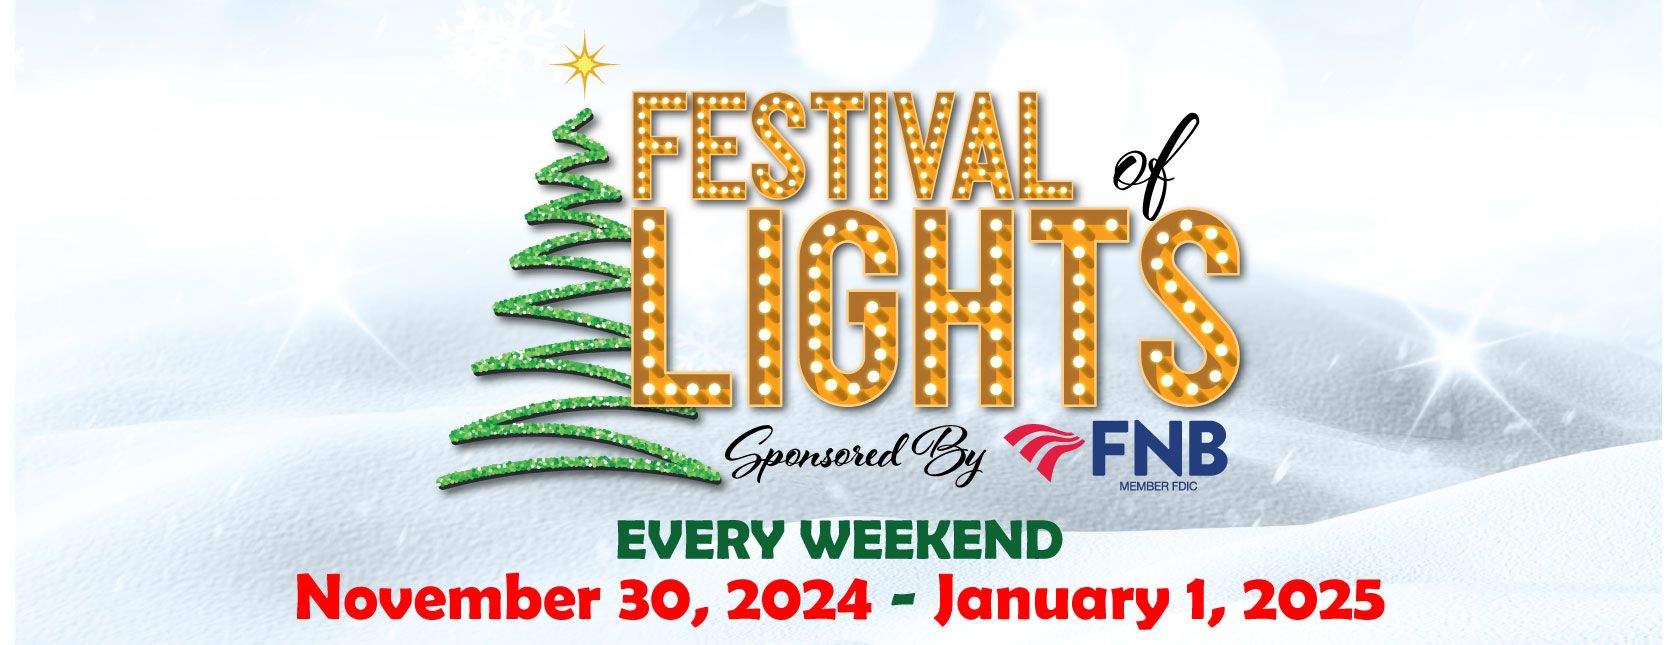 6th Annual Festival of Lights Presented by FNB